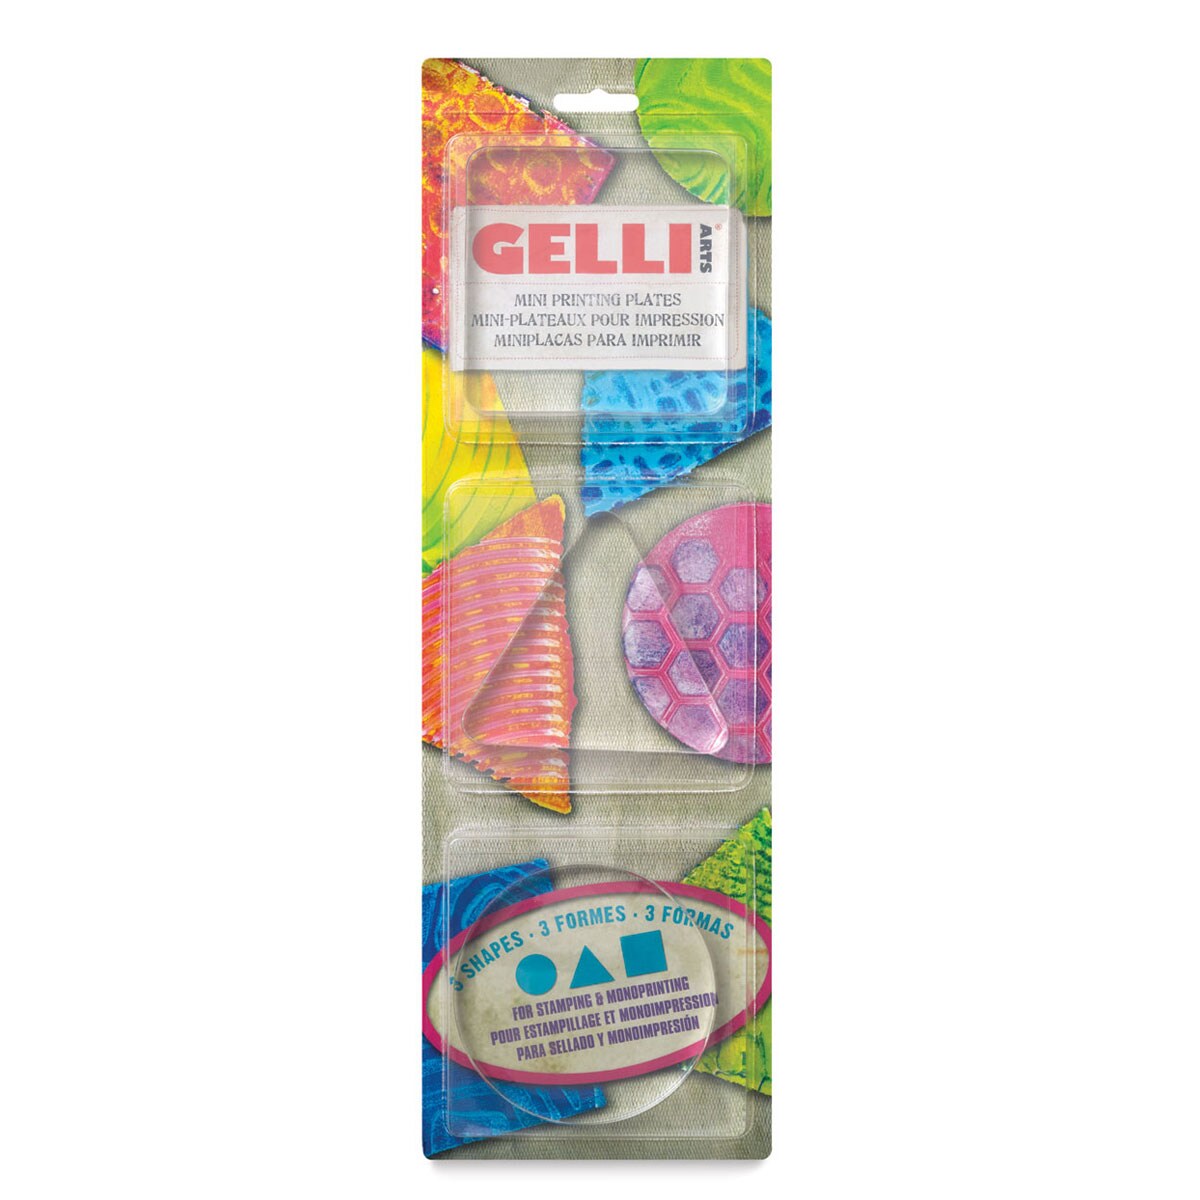 Gelli Arts Printing Plate - Minis, Set of 3, Circle, Square, and Triangle